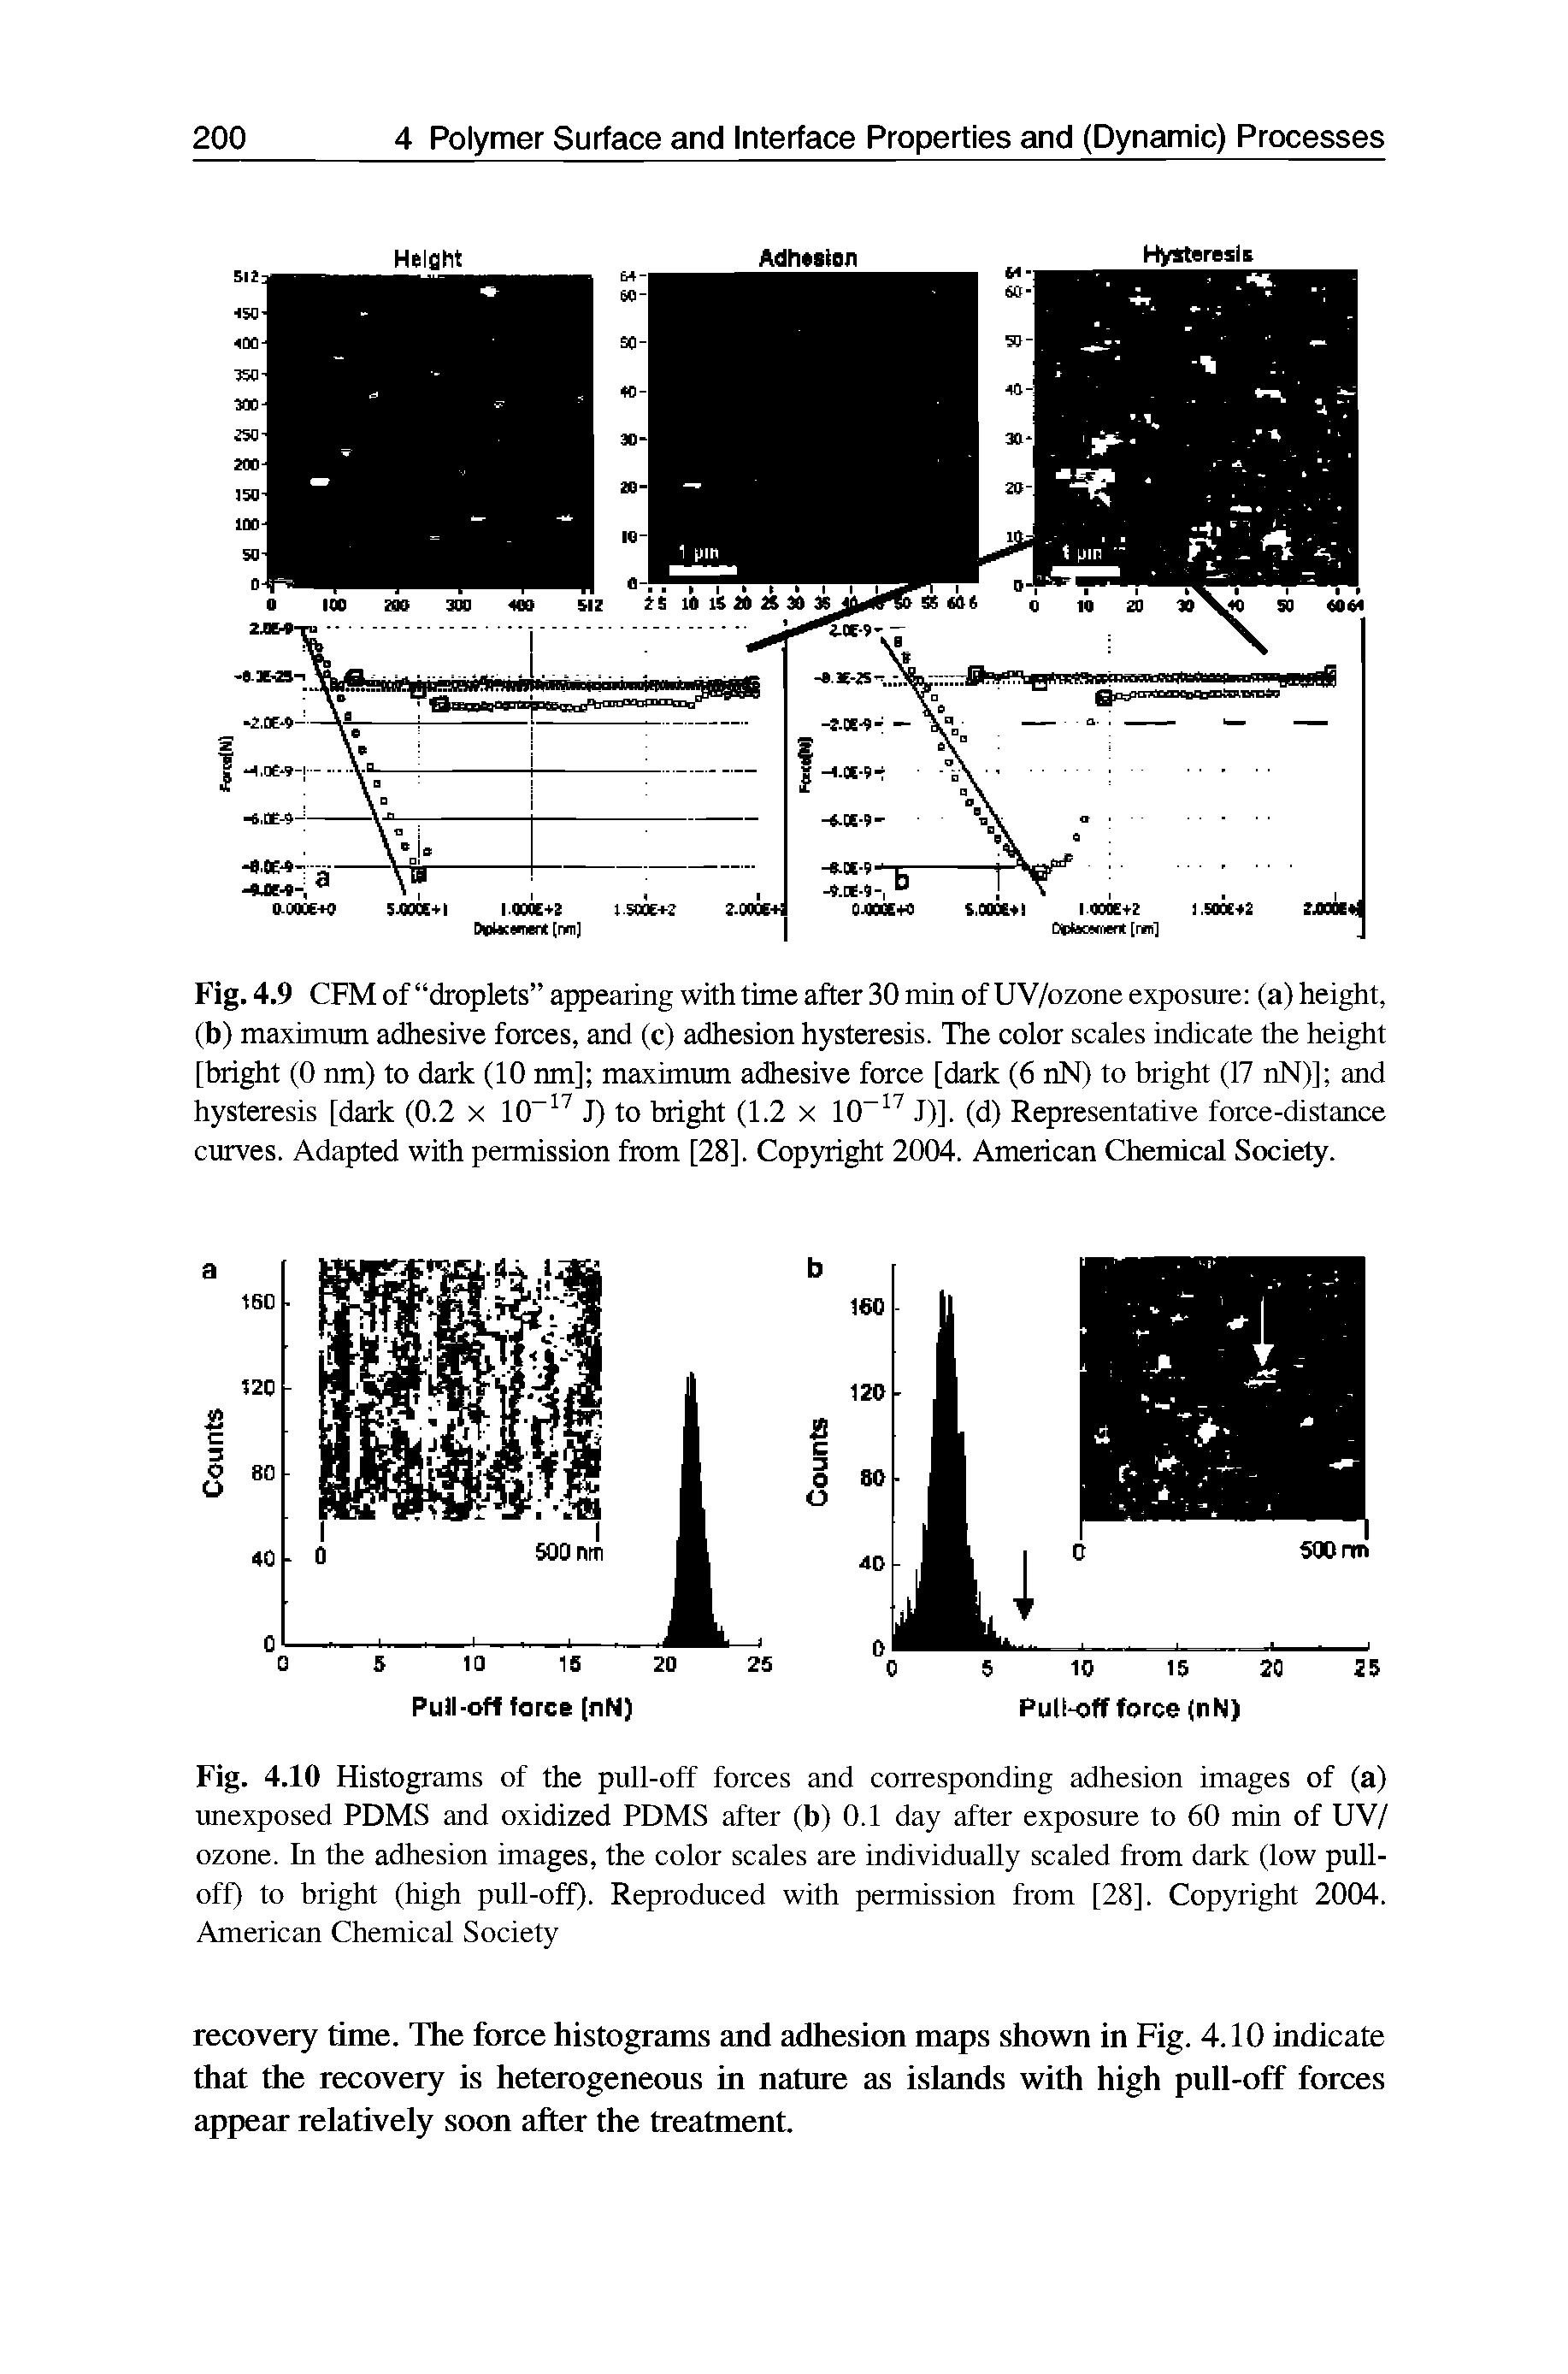 Fig. 4.10 Histograms of the pull-off forces and corresponding adhesion images of (a) unexposed PDMS and oxidized PDMS after (b) 0.1 day after exposure to 60 min of UV/ ozone. In the adhesion images, the color scales are individually scaled from dark (low pull-off) to bright (high pull-off). Reproduced with permission from [28]. Copyright 2004. American Chemical Society...